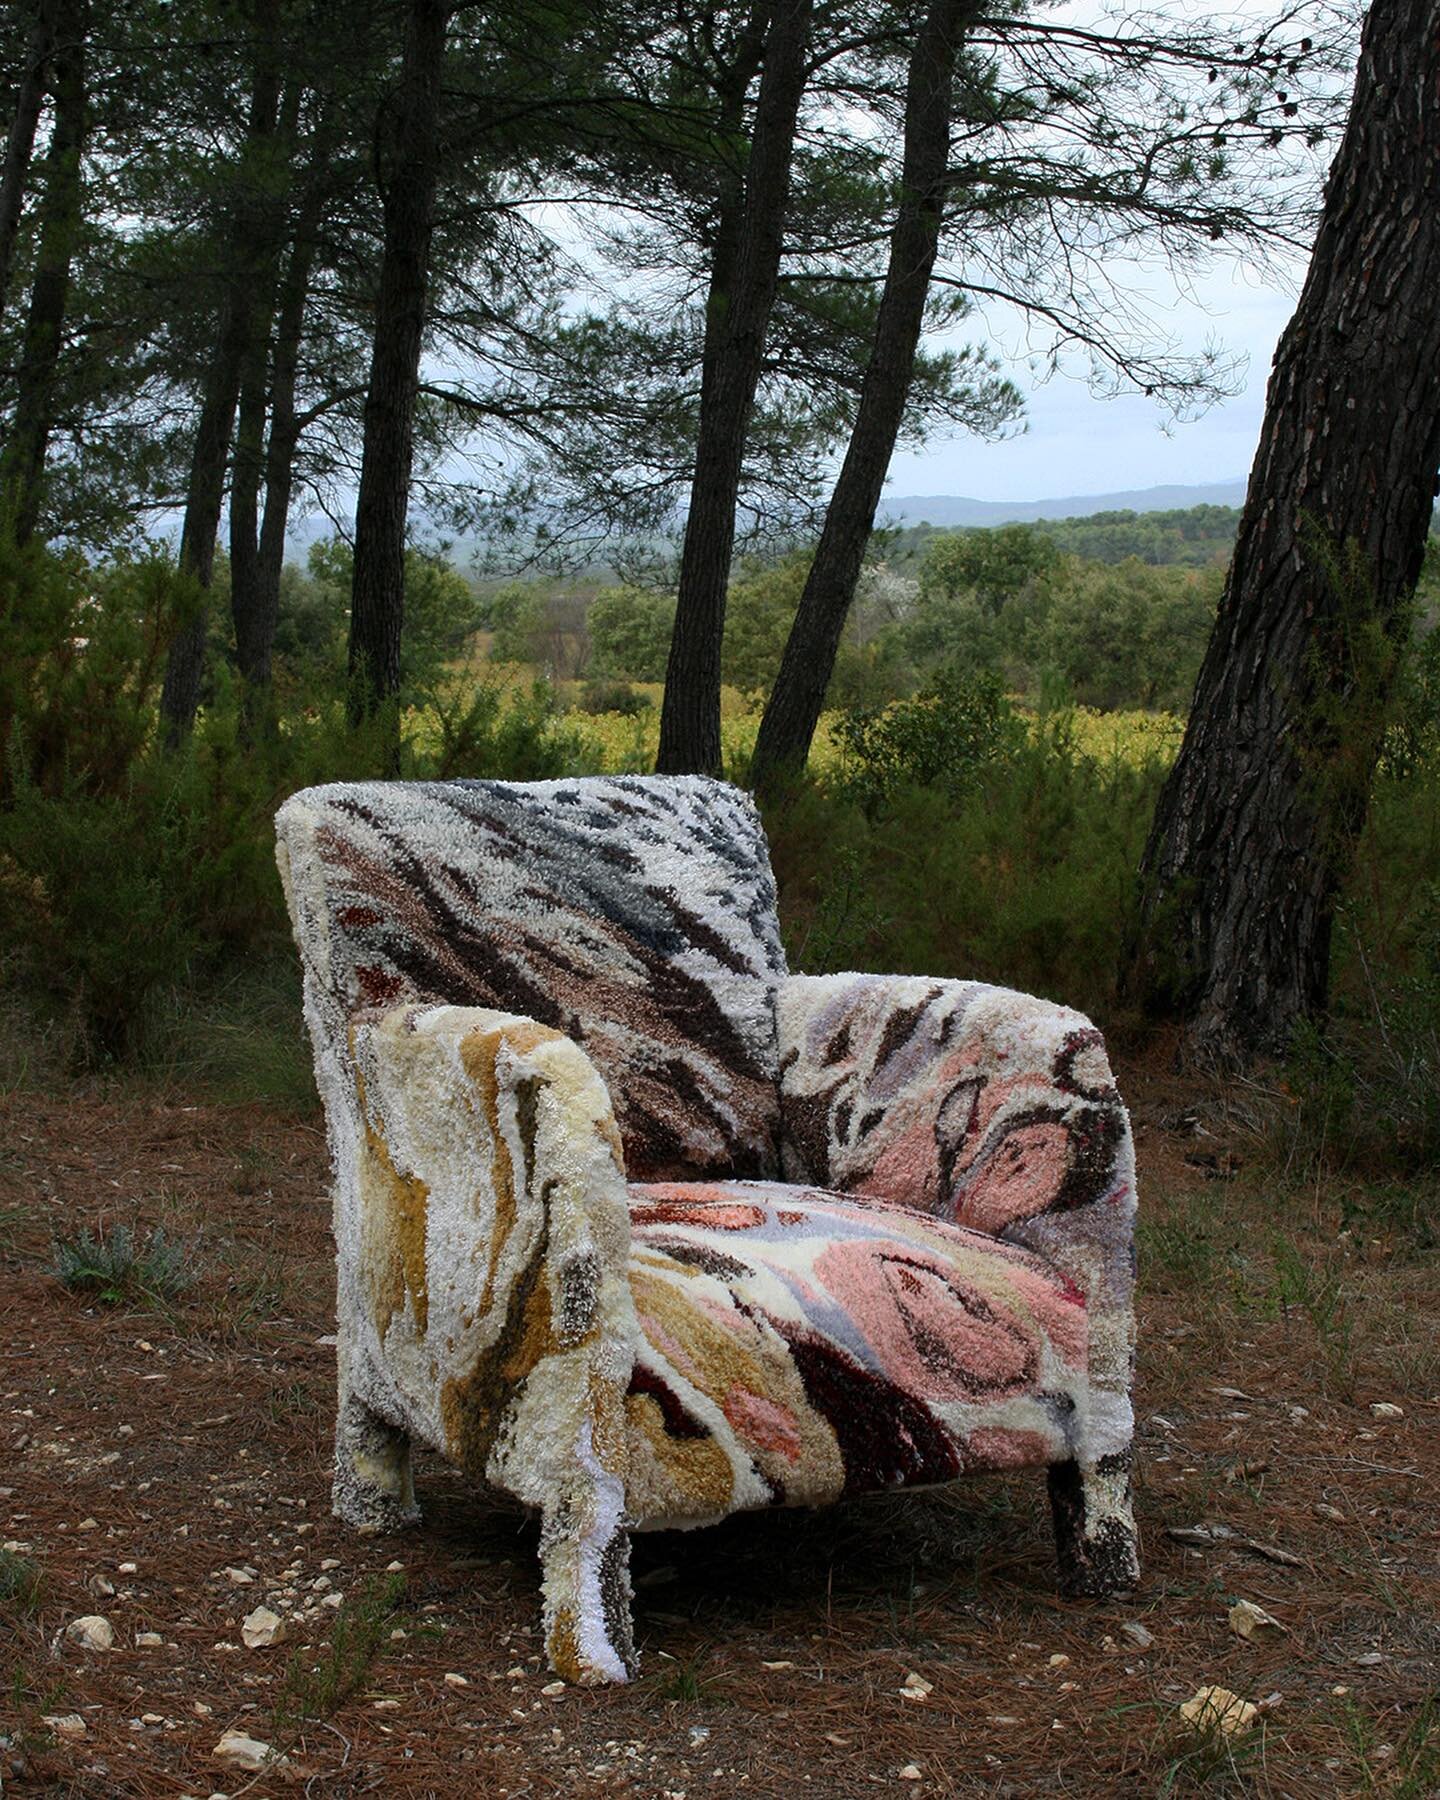 Finally, we can show you this very special piece of textile: The tufted armchair was made by textile designer Ma&euml;lis @maelisray in her residency in September last year at Lottozero. Can you imagine she was tufting this in one week? She graduated